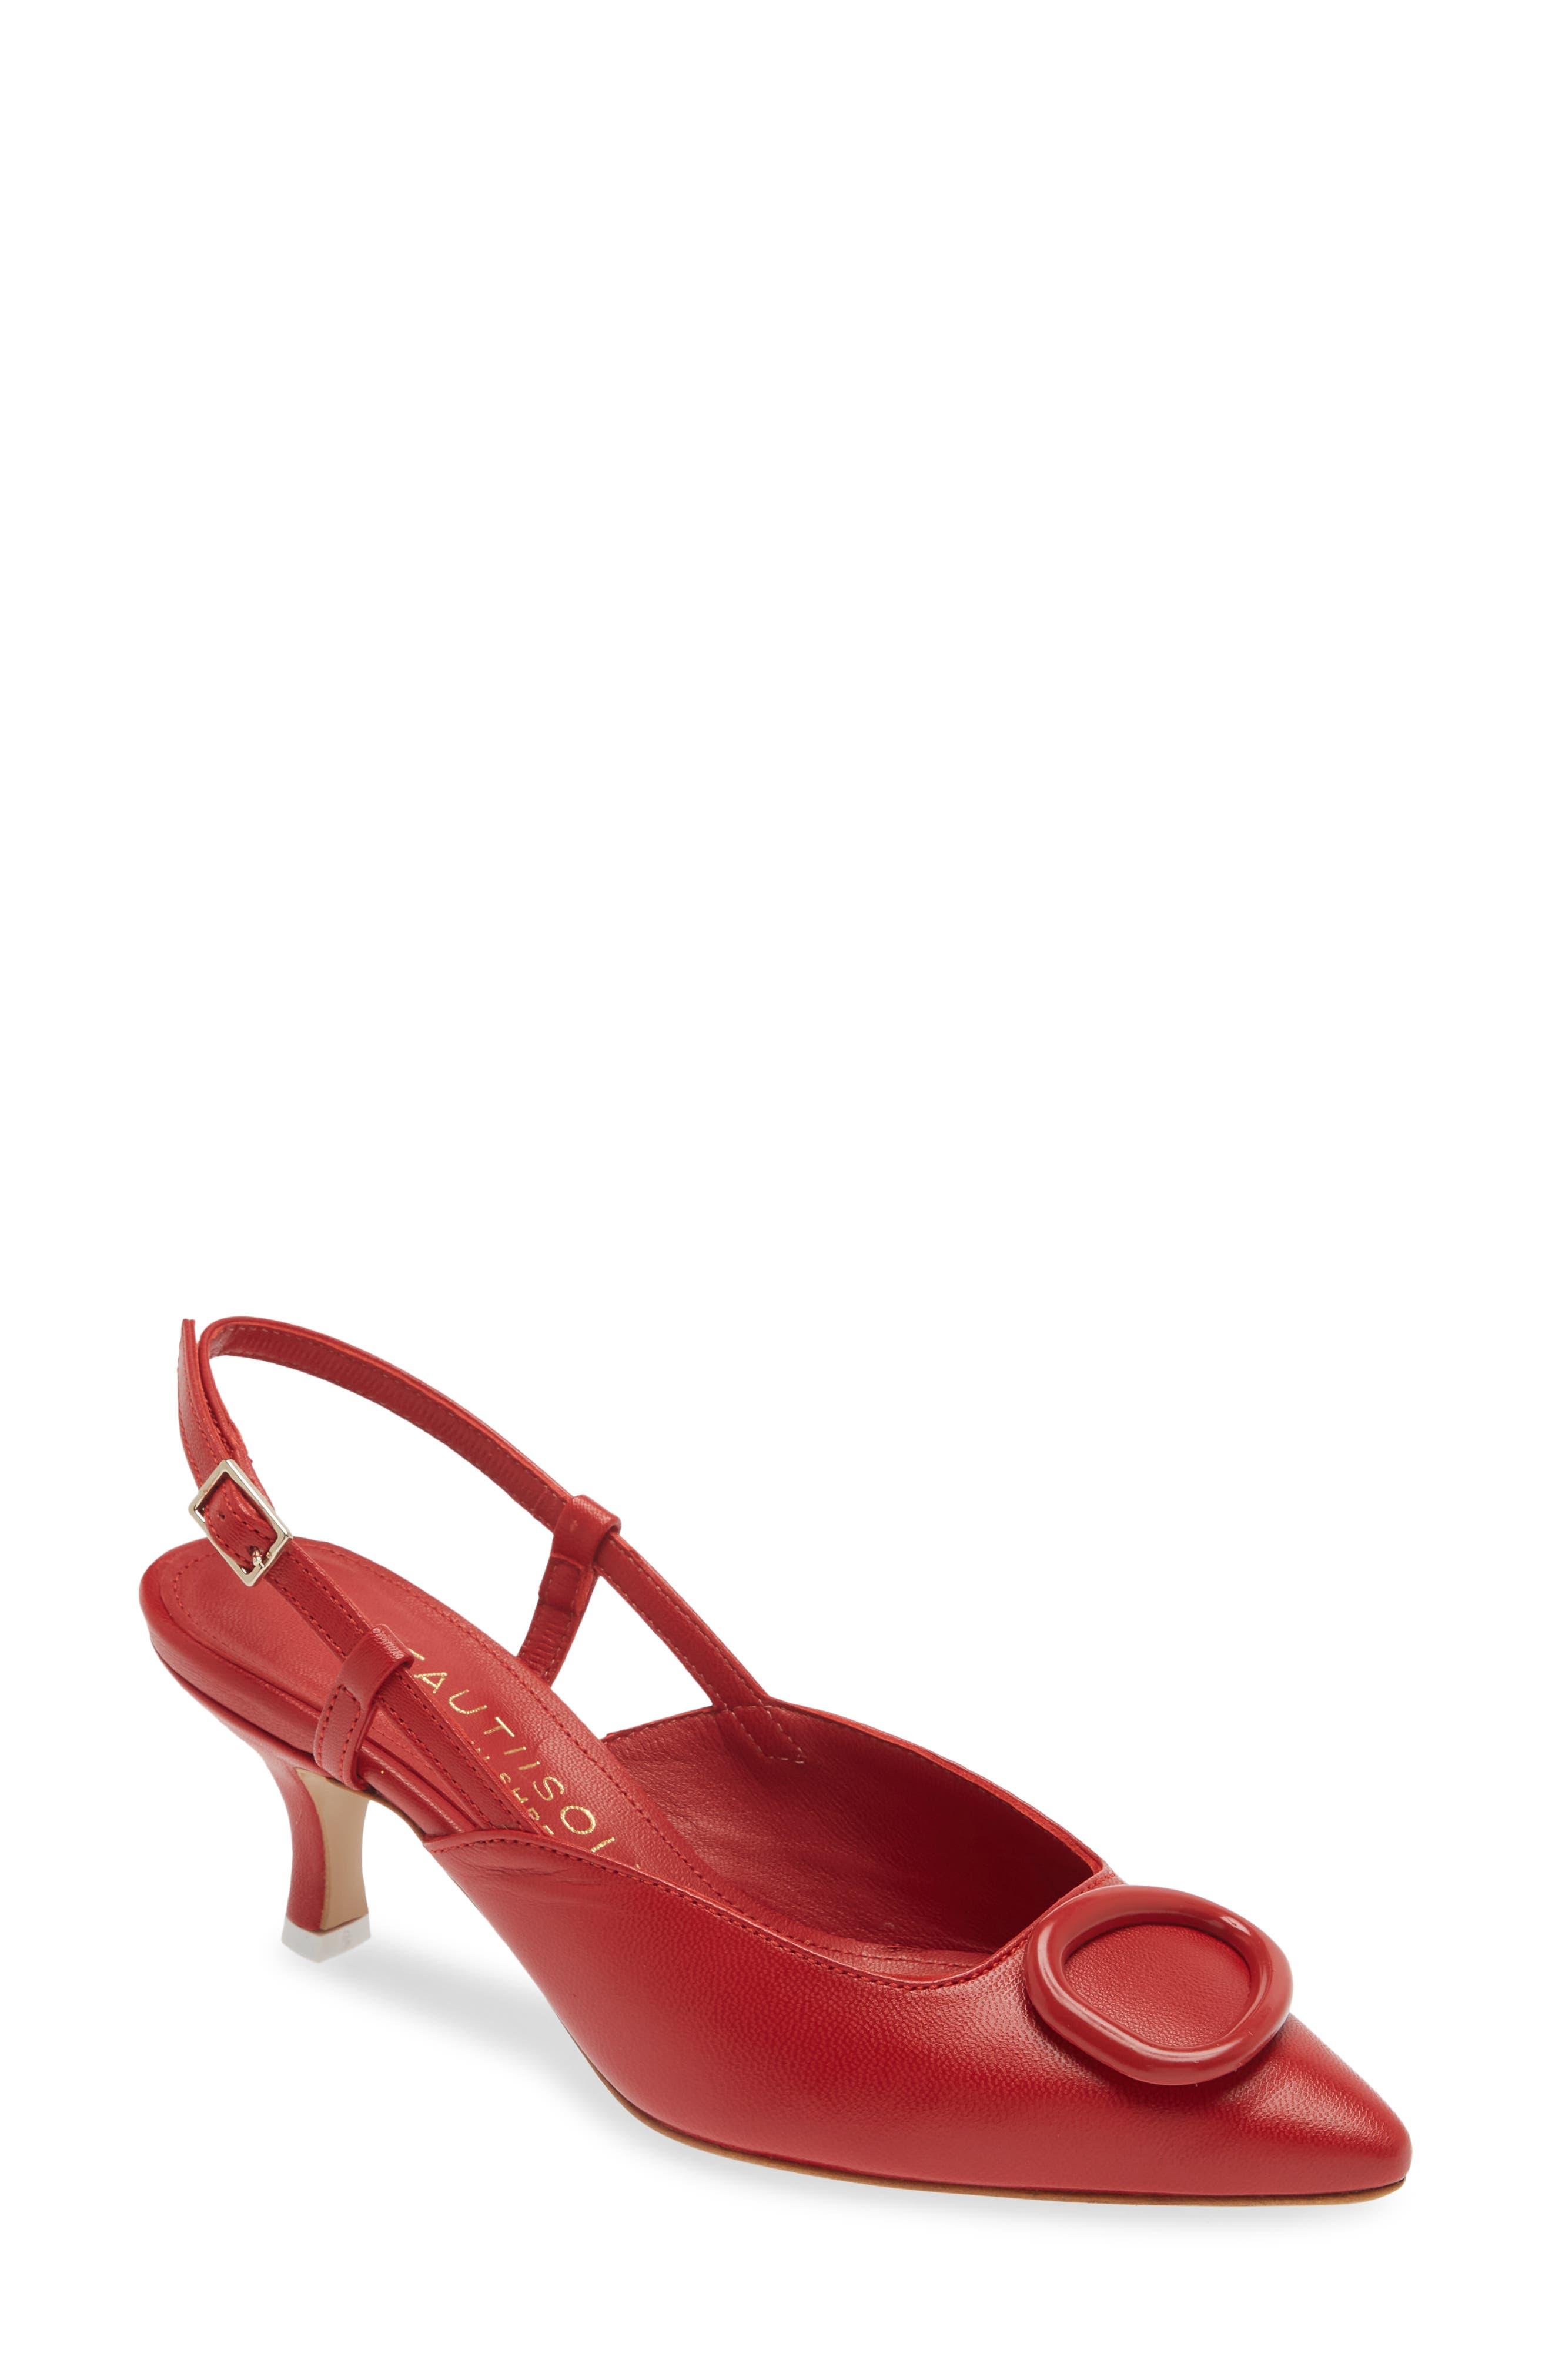 Beautiisoles Amber Slingback Pointed Toe Pump in Red | Lyst